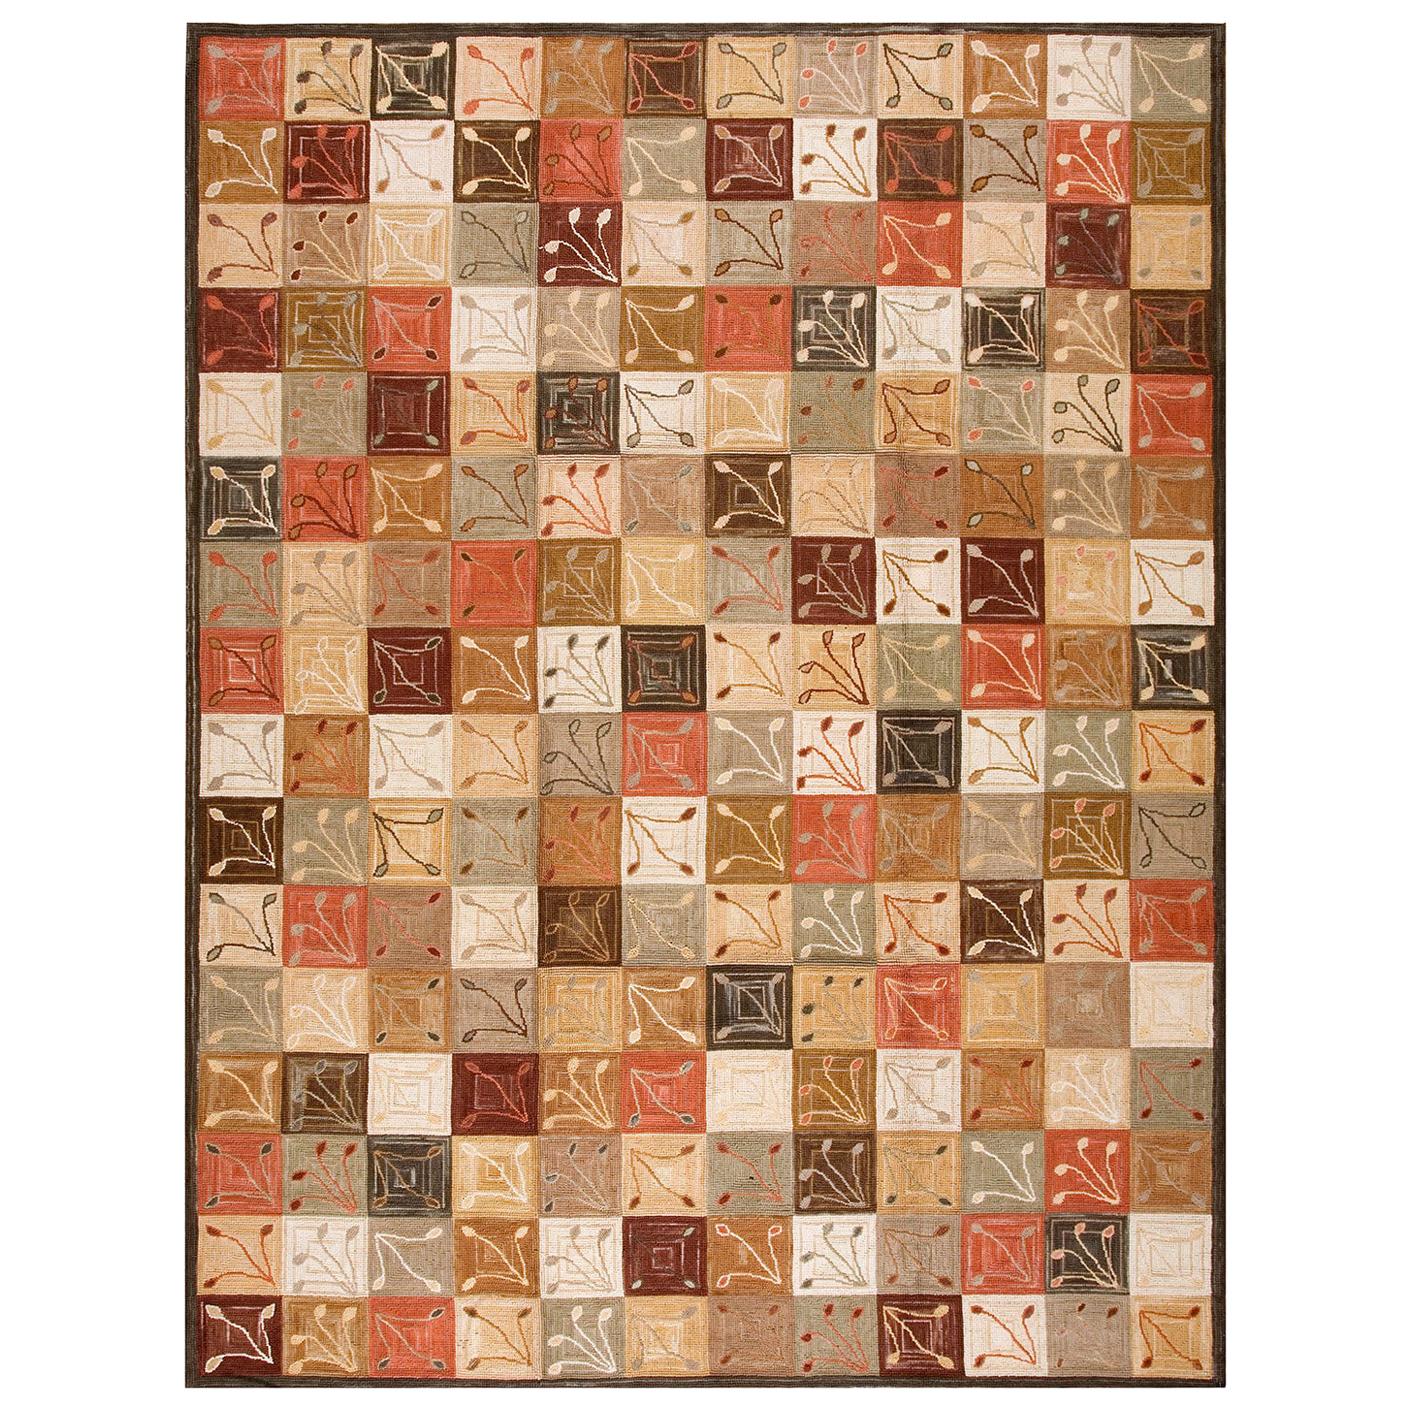 Contemporary American Hooked Rug (8' x 10' - 244x 305 )